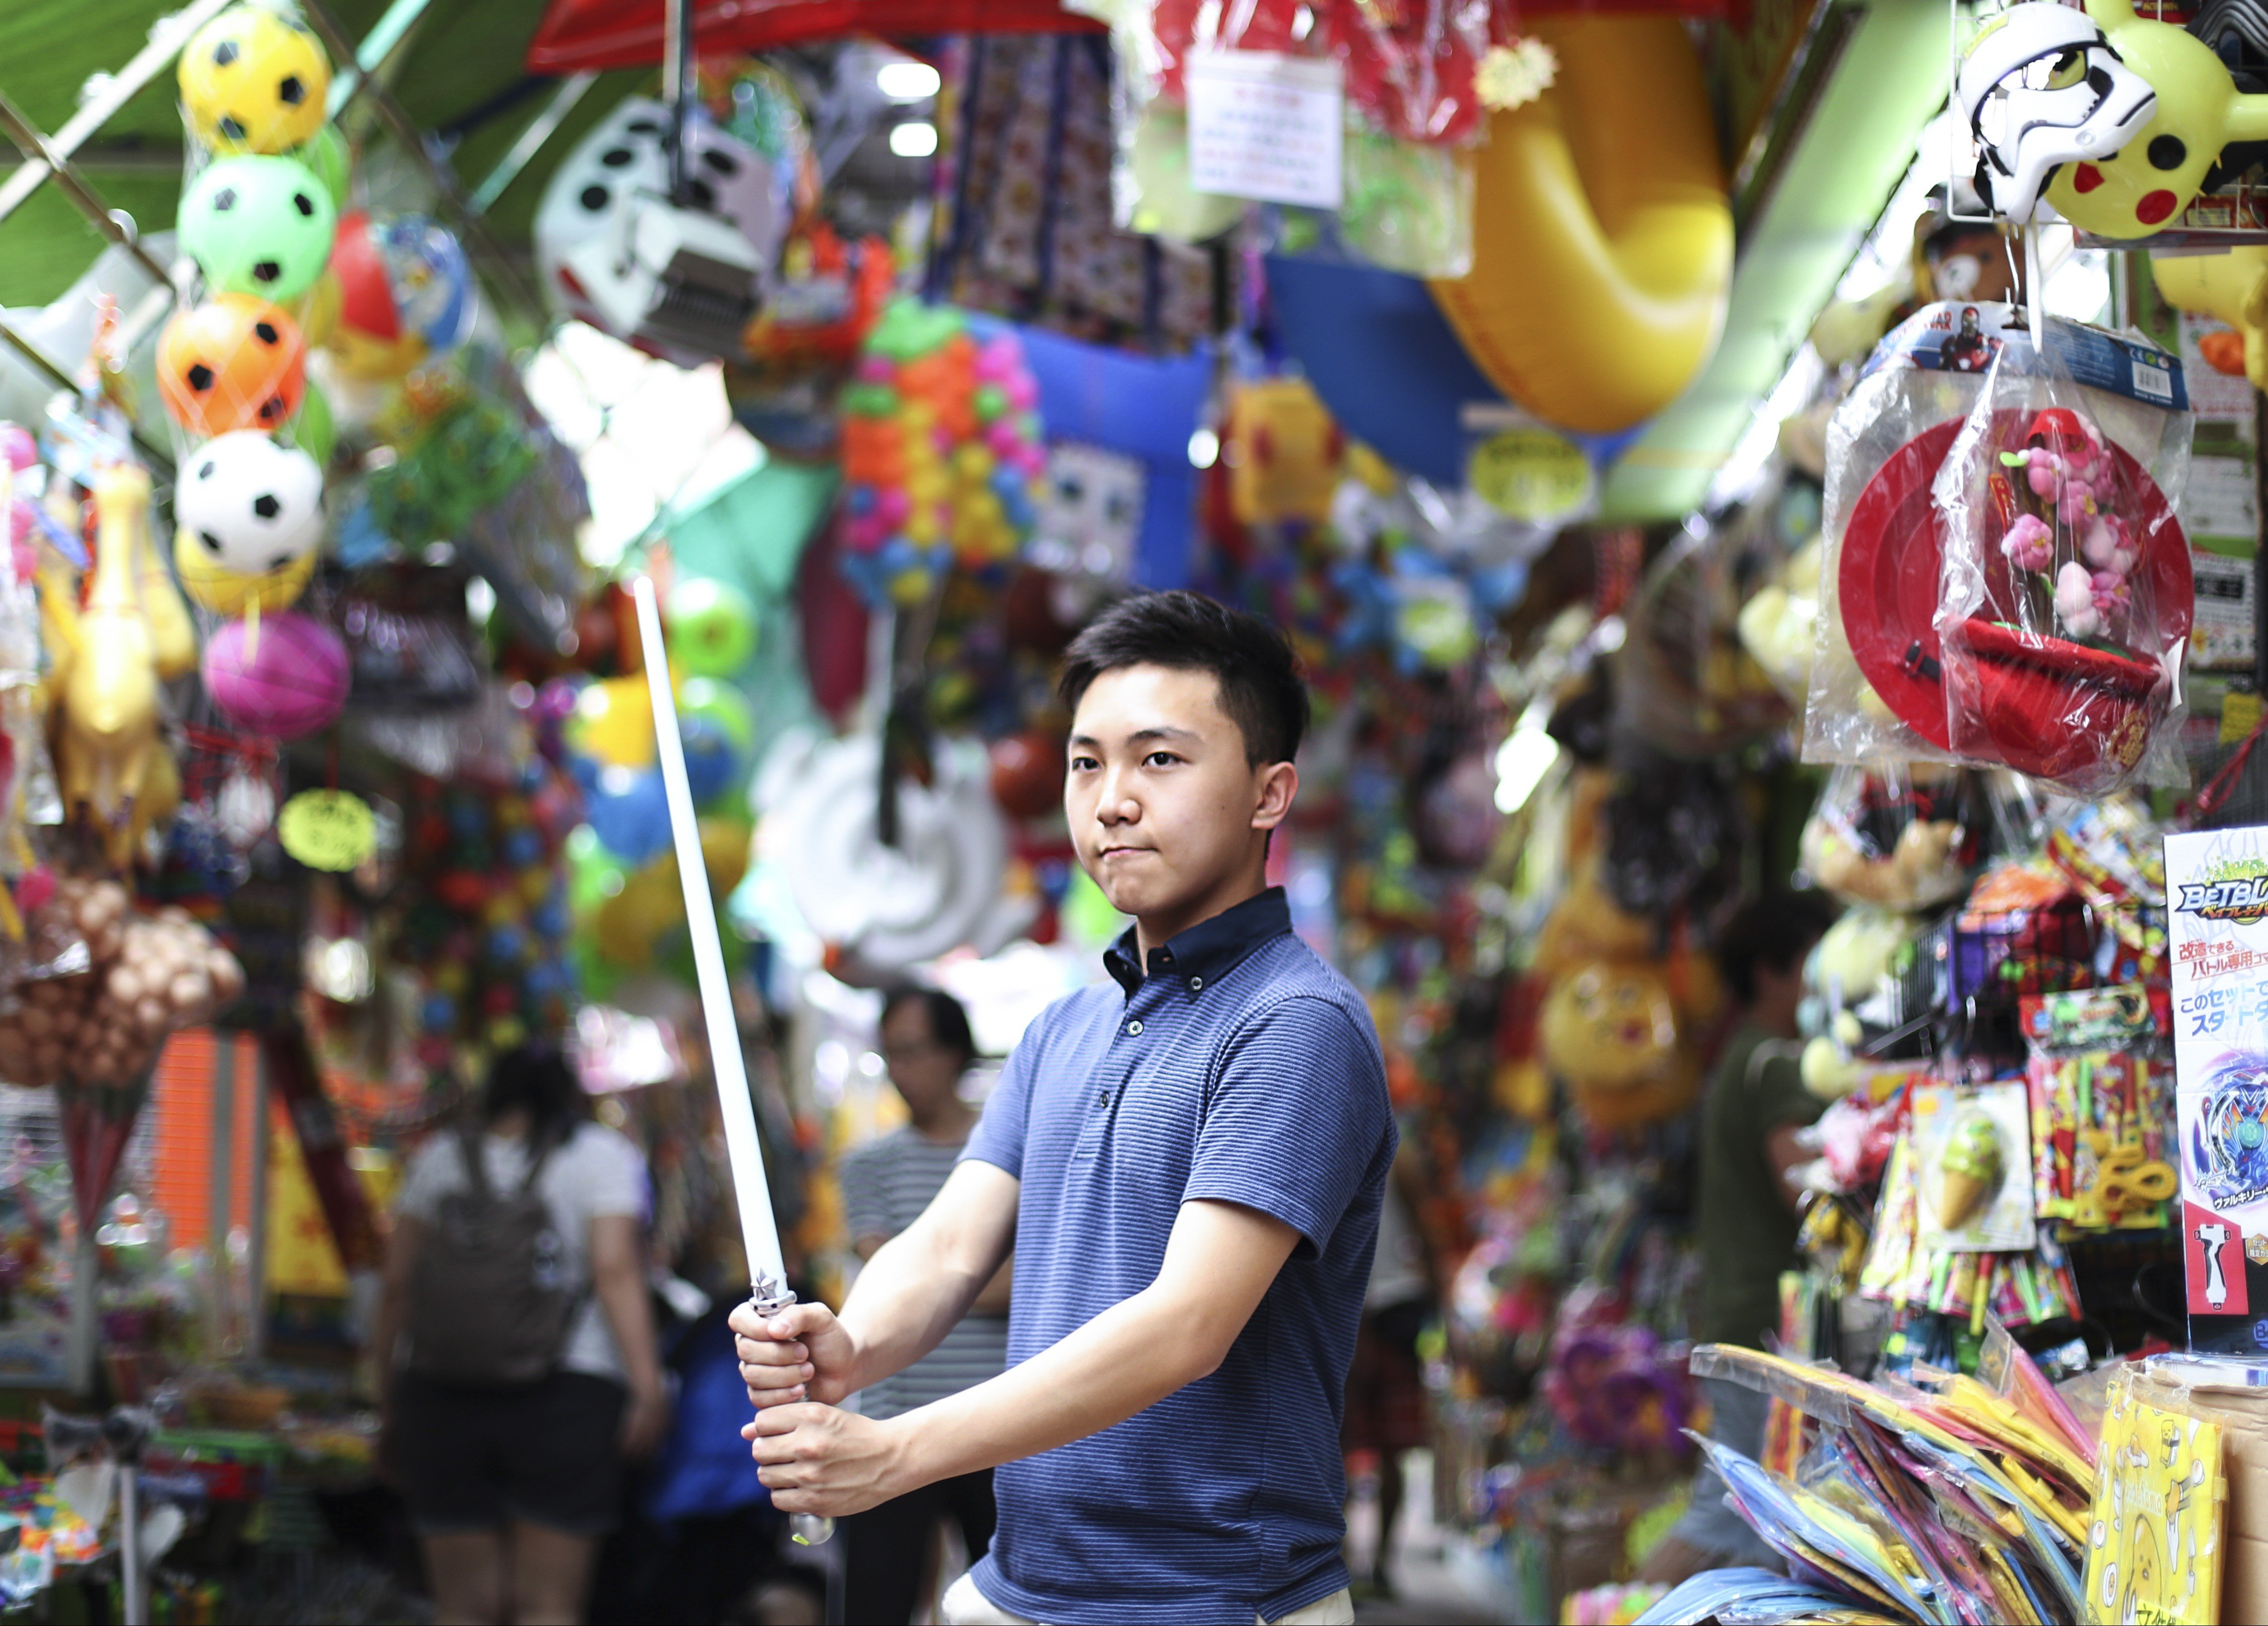 Porsche Kong spent his childhood around Apliu Street, Sham Shui Po and used to play with kids of the toy vendors along Fuk Wing Street. Photo: Nora Tam